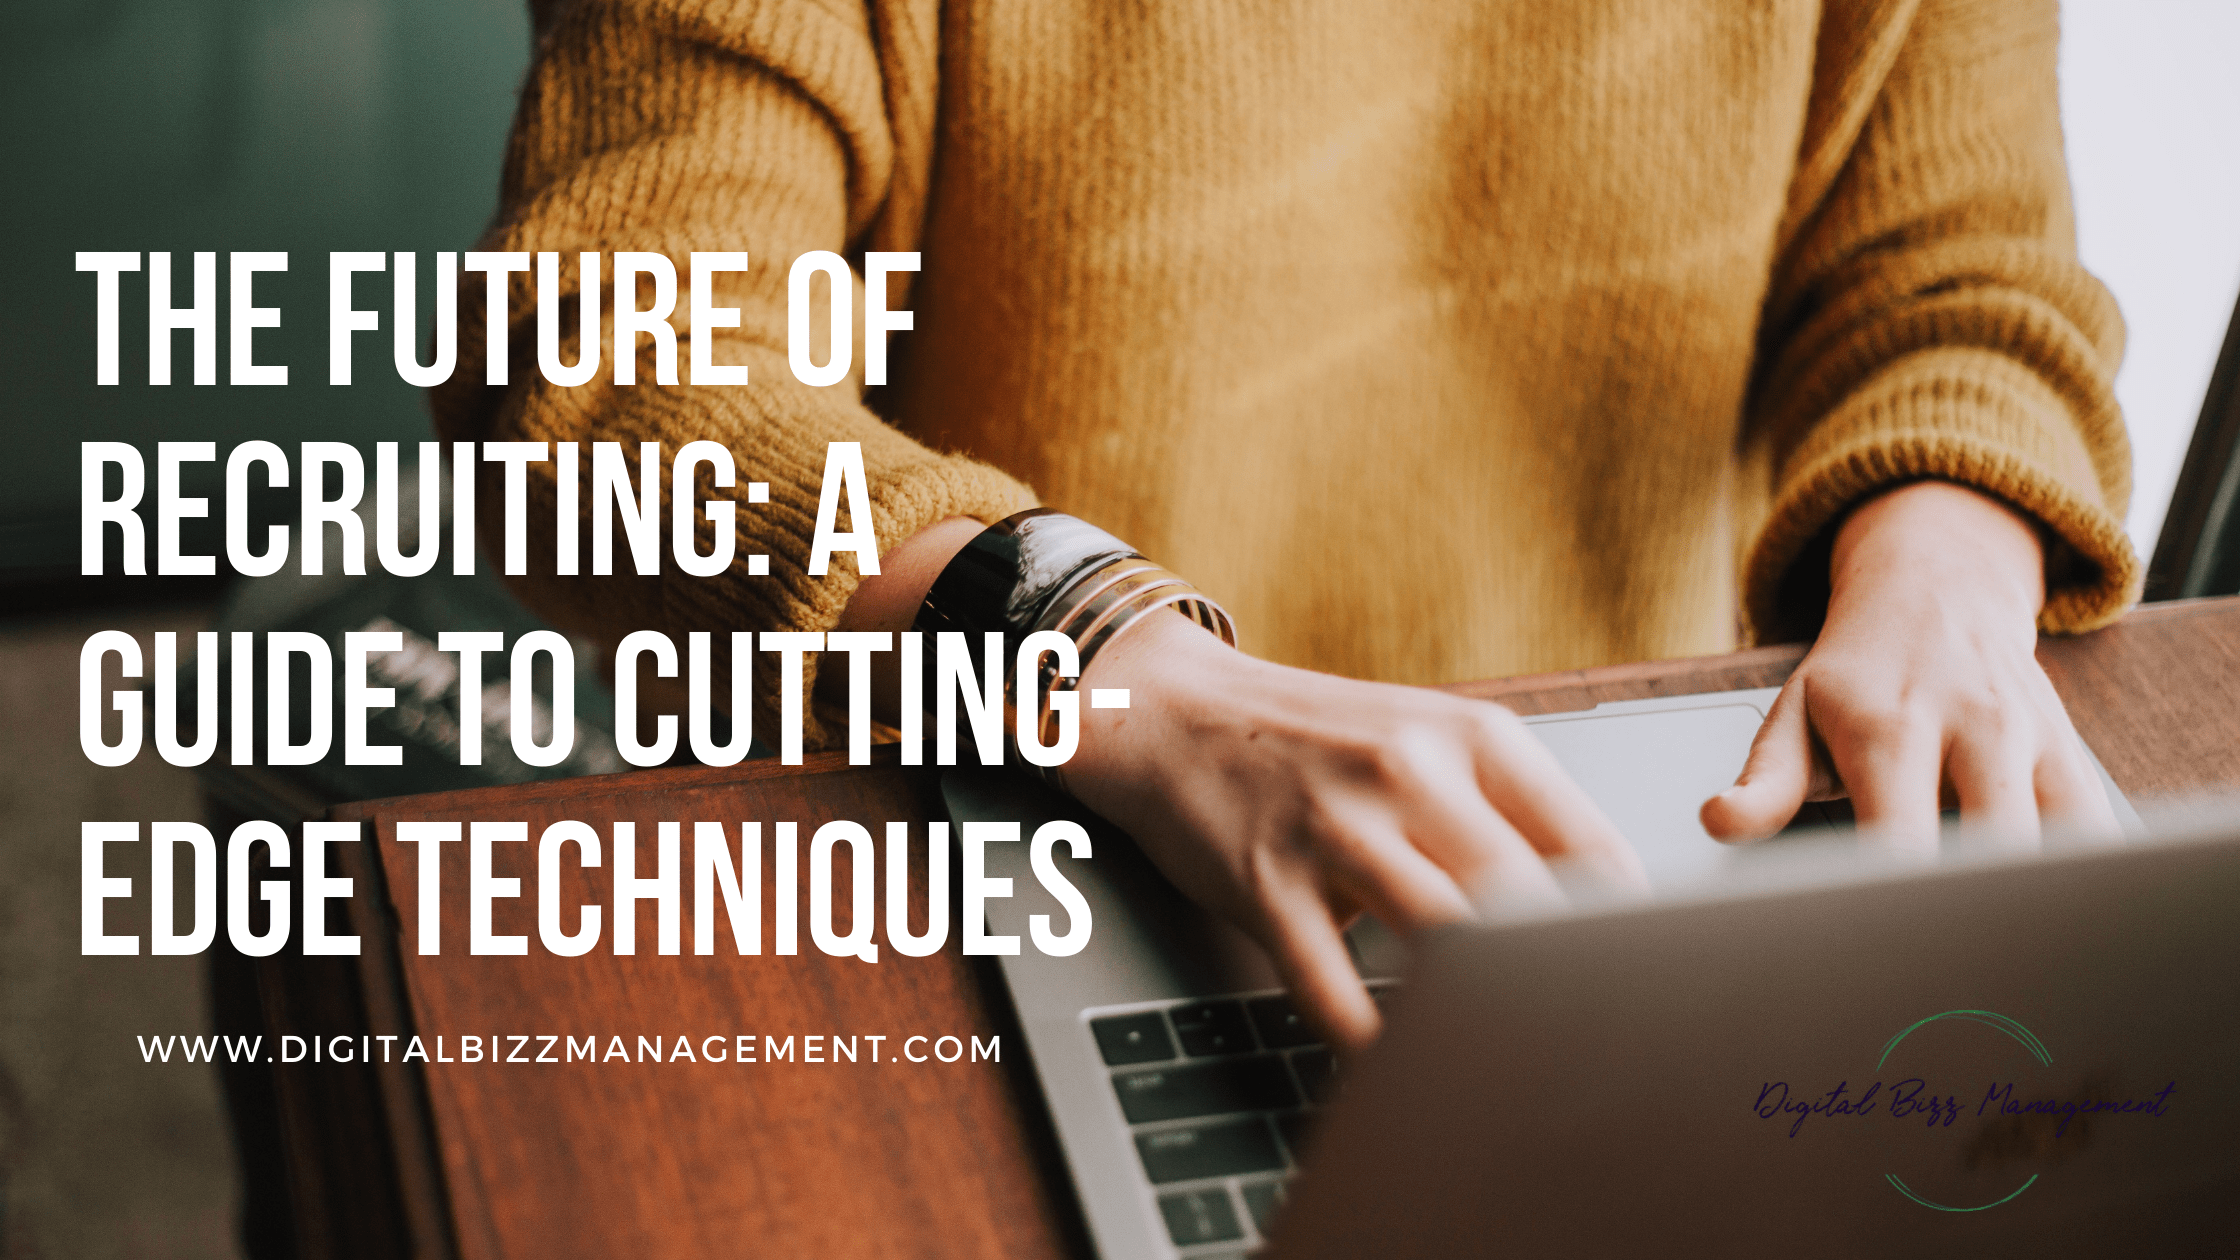 The Future of Recruiting: A Guide to Cutting-Edge Techniques